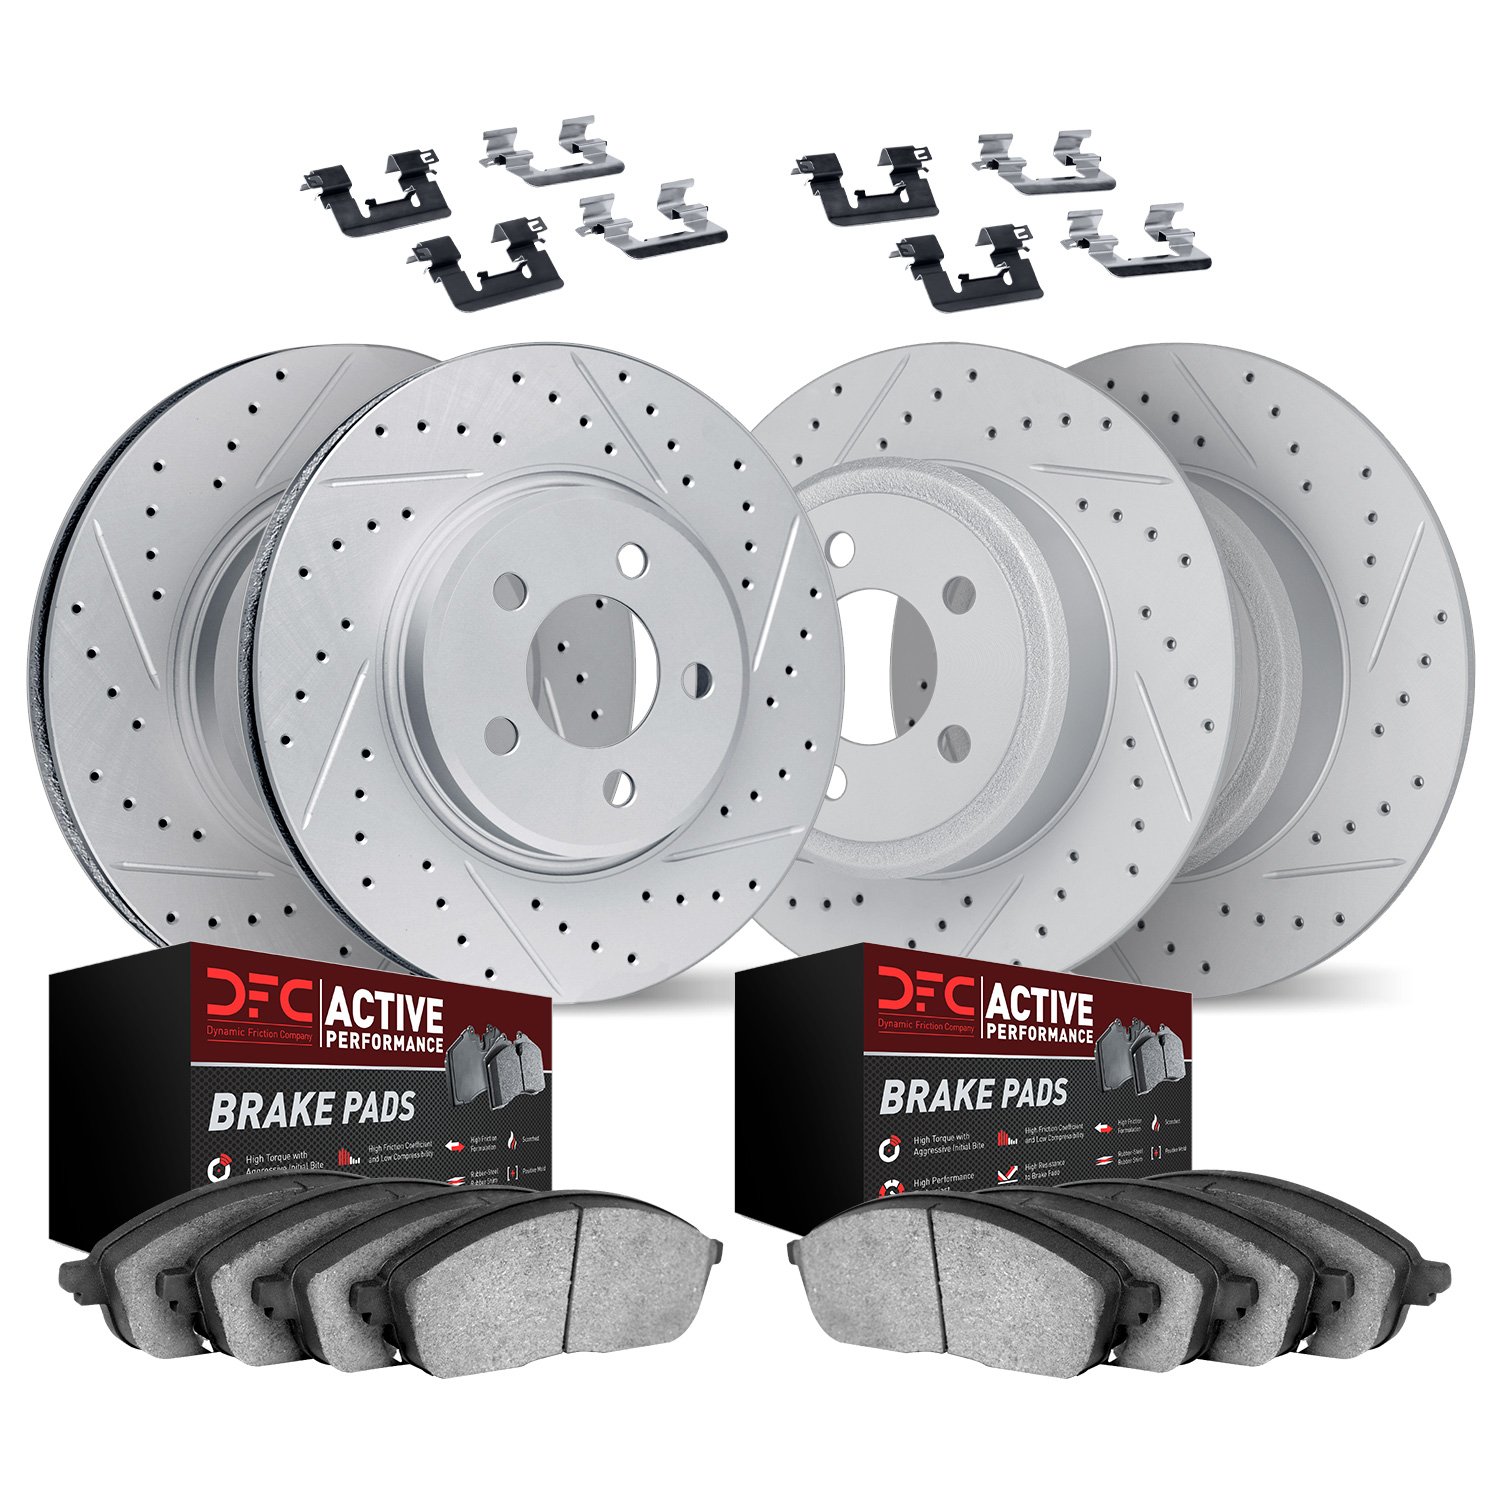 2714-01003 Geoperformance Drilled/Slotted Brake Rotors with Active Performance Pads Kit & Hardware, 2010-2013 Suzuki, Position: